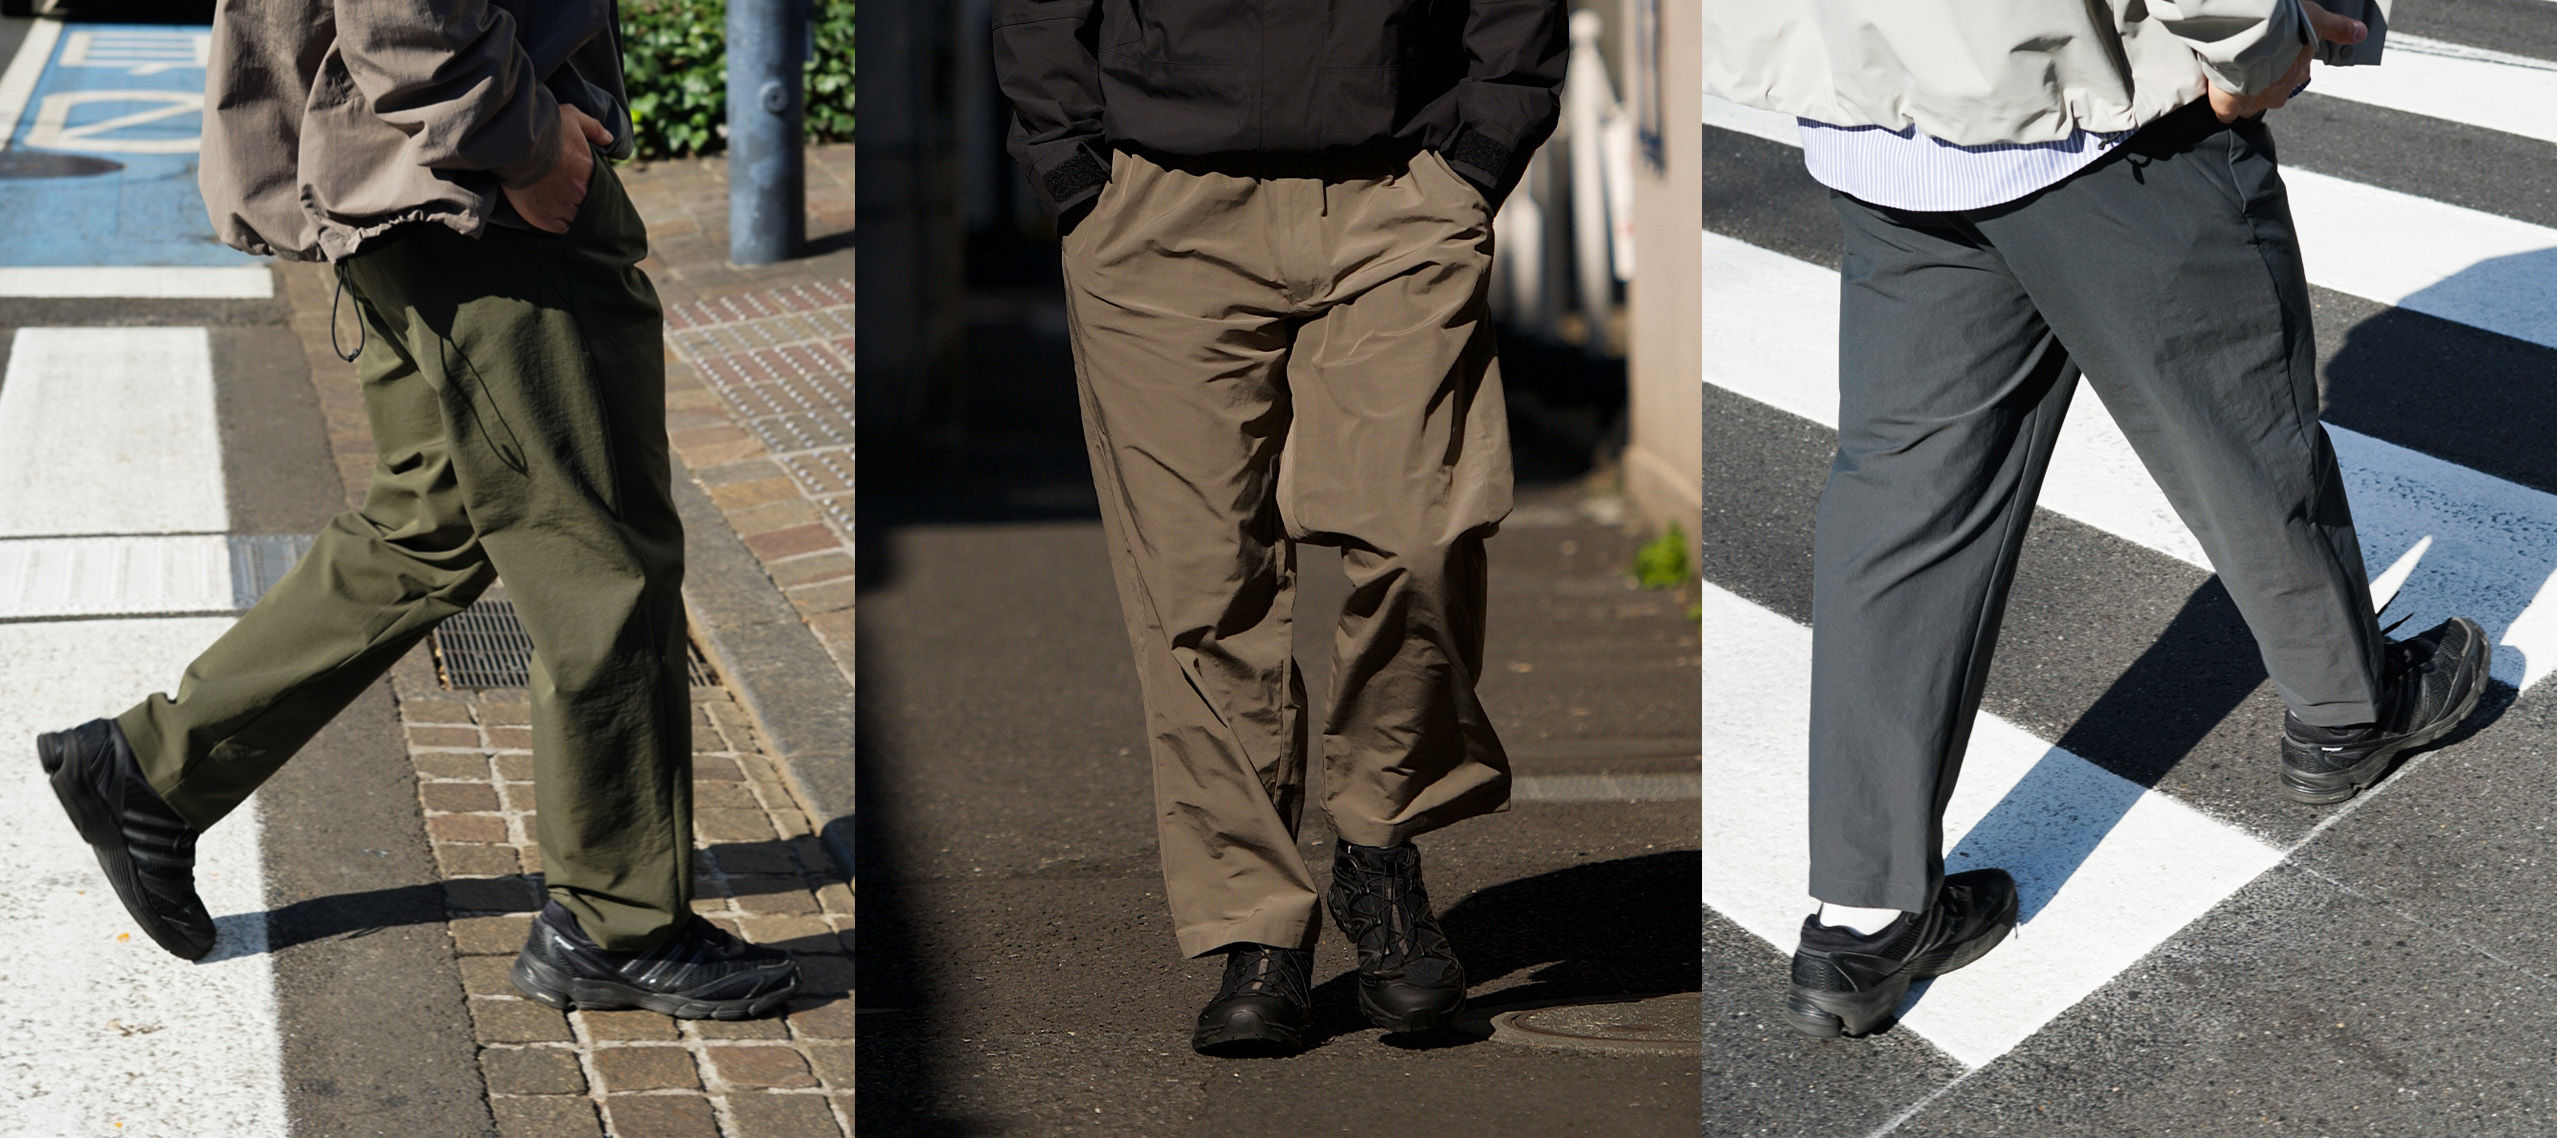 Staff Picks: The latest Pants Collection, Product Guides